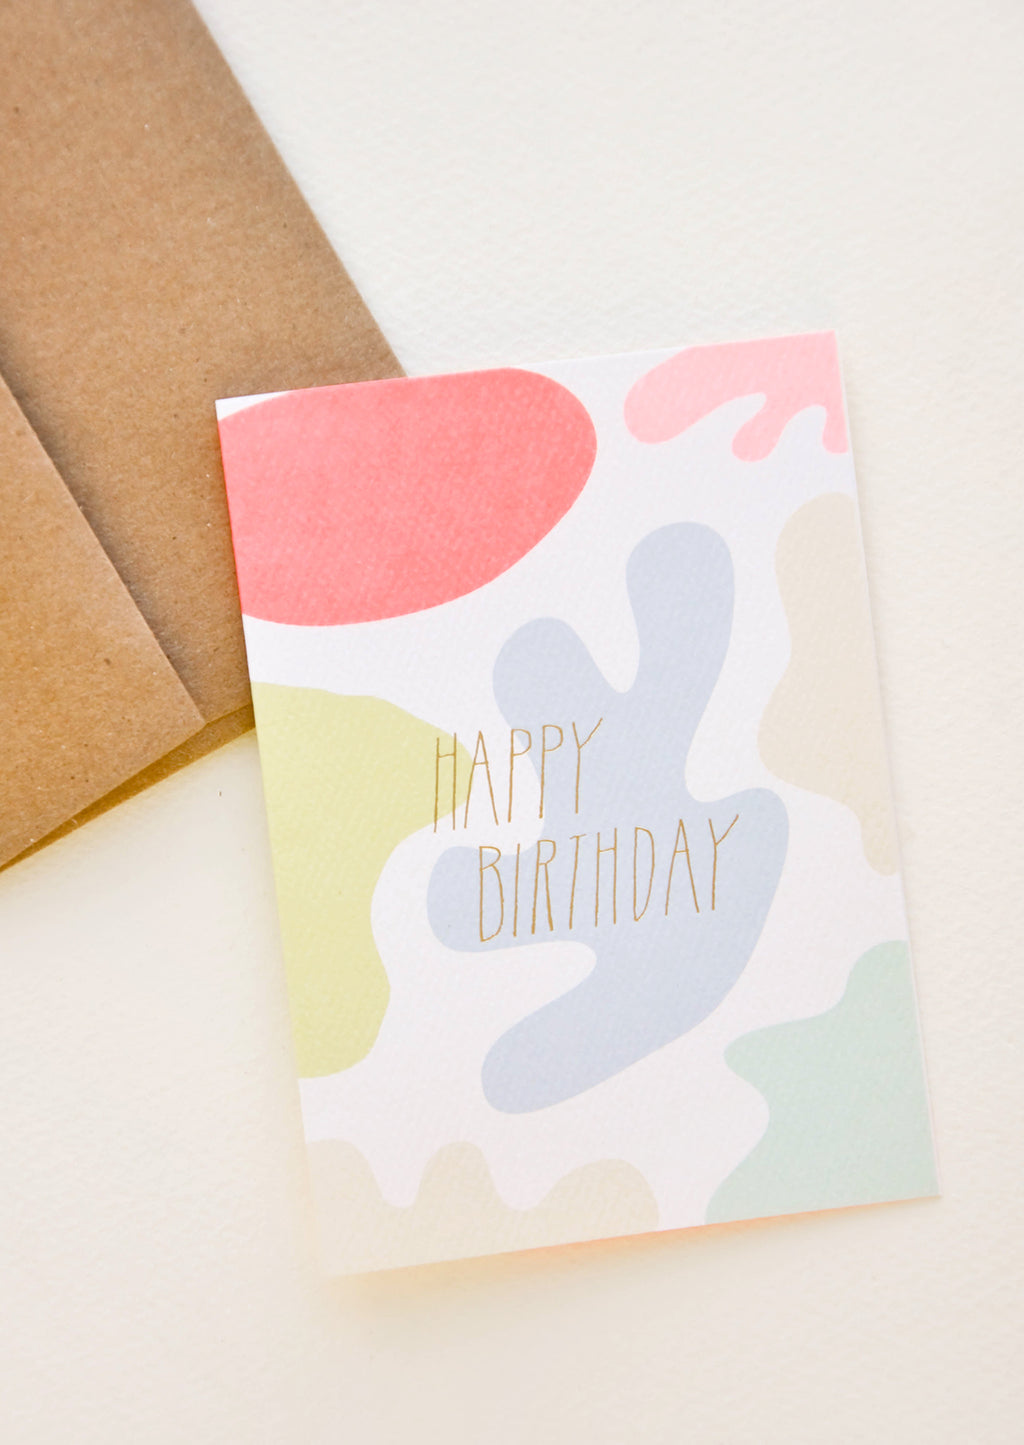 2: A brown paper envelope and greeting card patterned with differently colored blobs and the words "happy birthday" in uppercase gold foil.